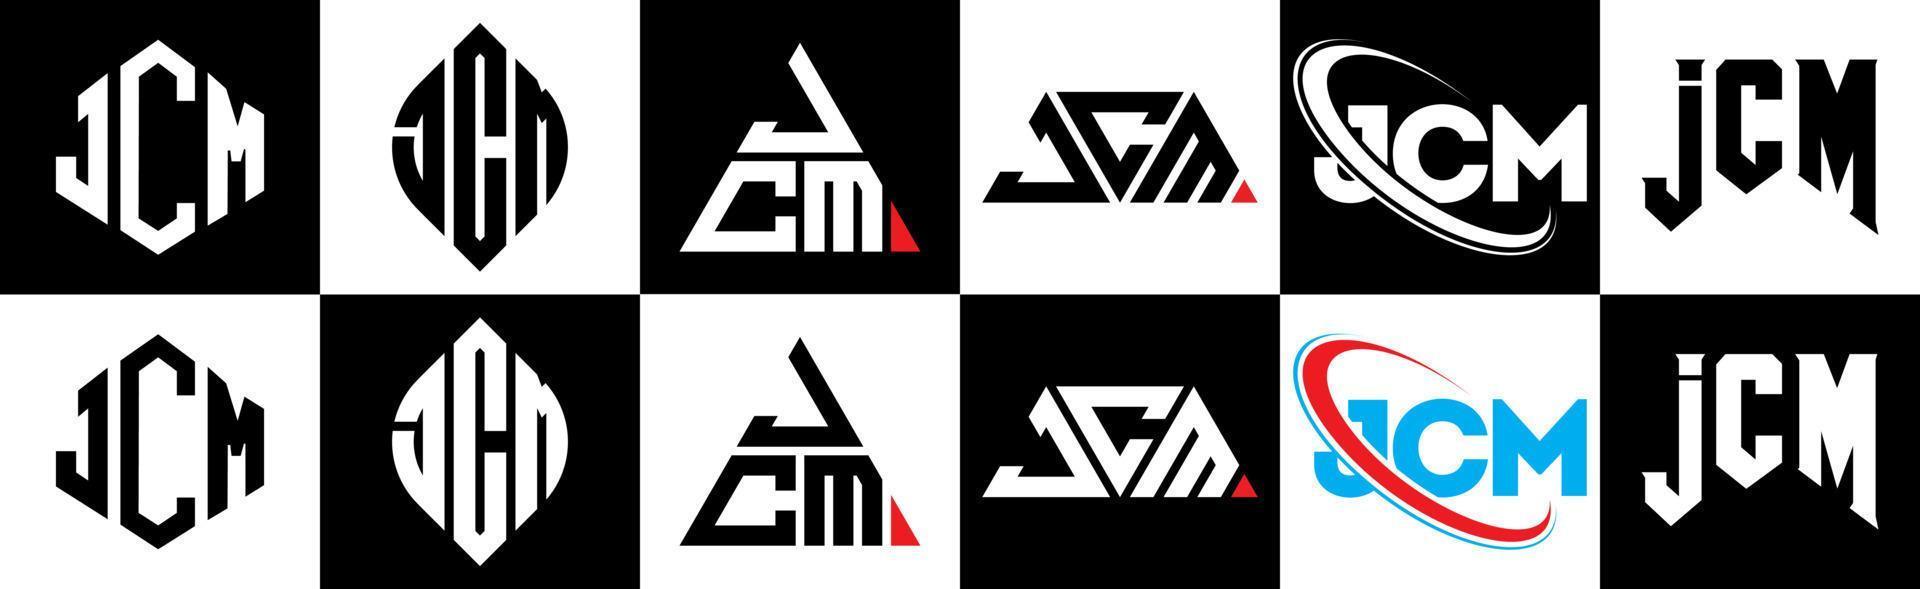 JCM letter logo design in six style. JCM polygon, circle, triangle, hexagon, flat and simple style with black and white color variation letter logo set in one artboard. JCM minimalist and classic logo vector